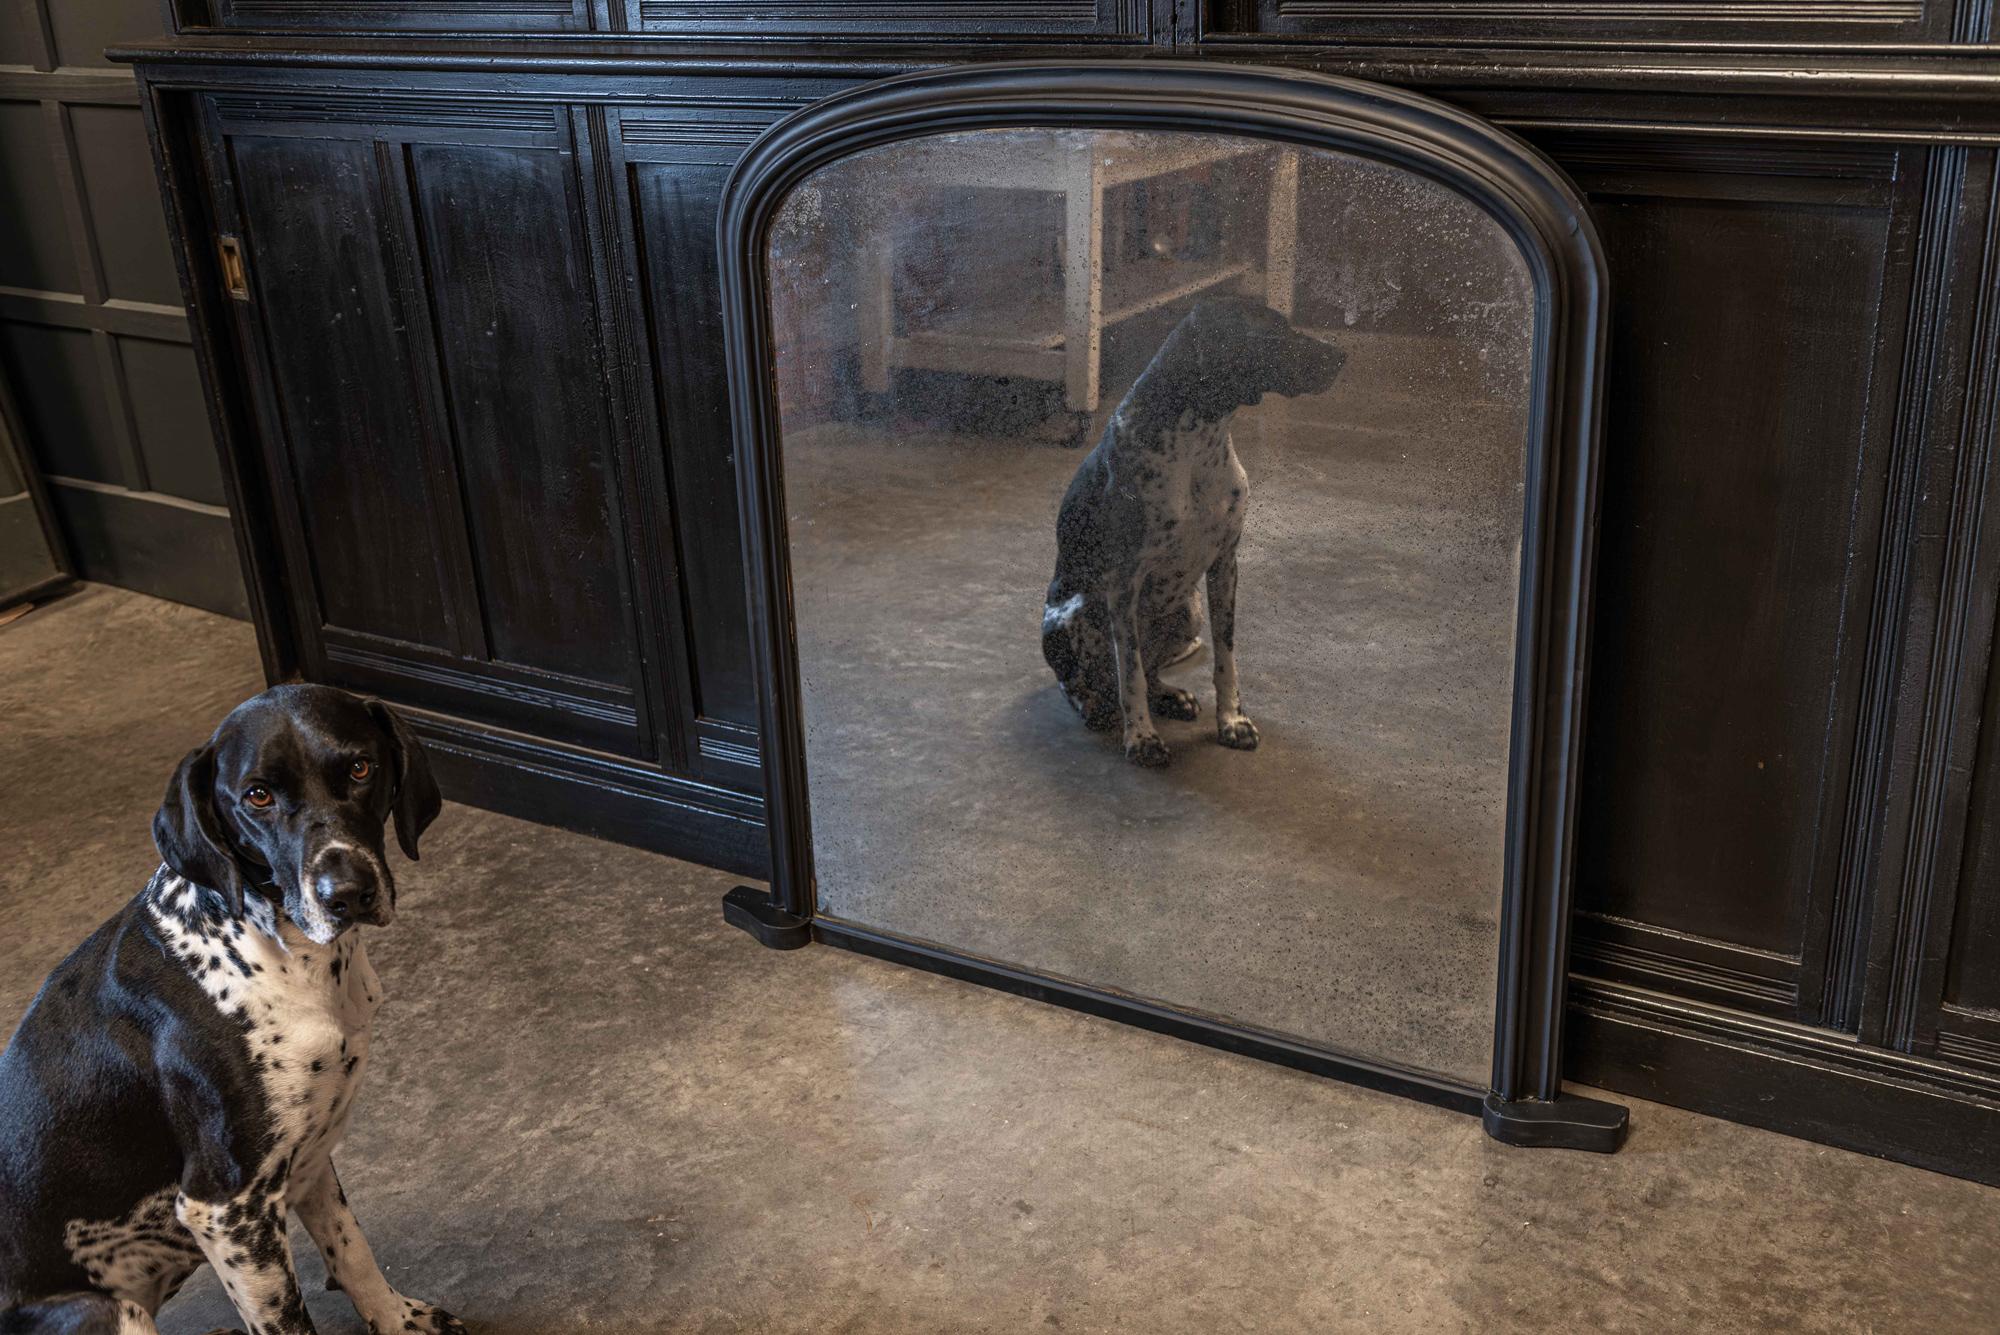 19th century English ebonized foxed overmantle mirror
circa 1876.

19th century ebonized foxed overmantle mirror with an excellent original foxed mercury mirror plate, original backboards and newspaper cuttings from the height of the Industrial